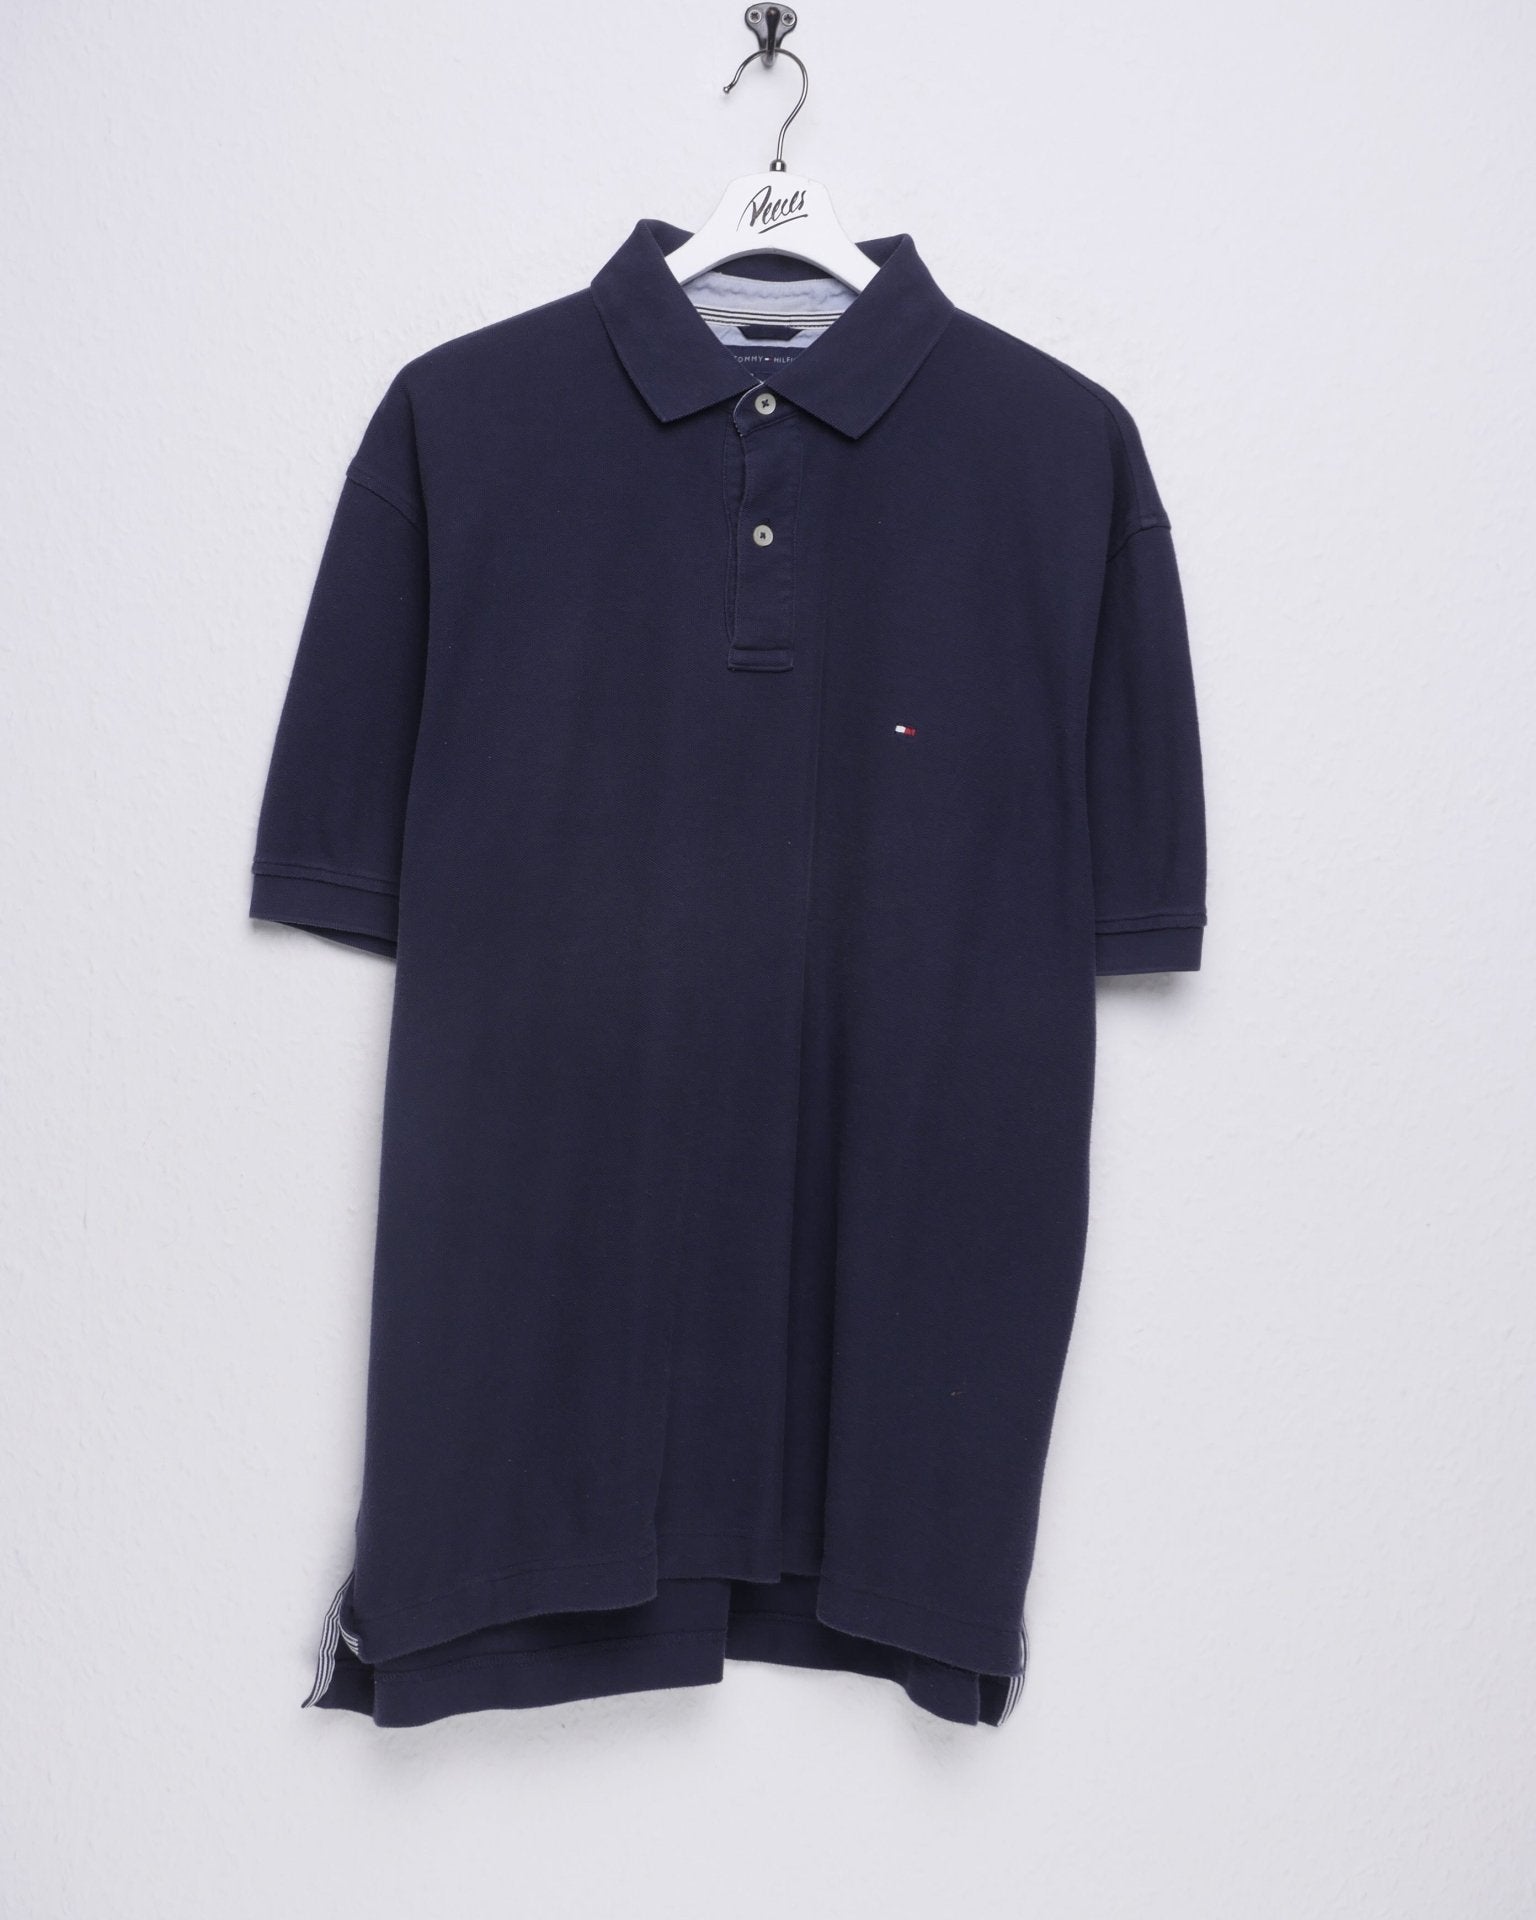 Tommy Hilfiger embroidered Logo navy S/S Polo Shirt - Peeces